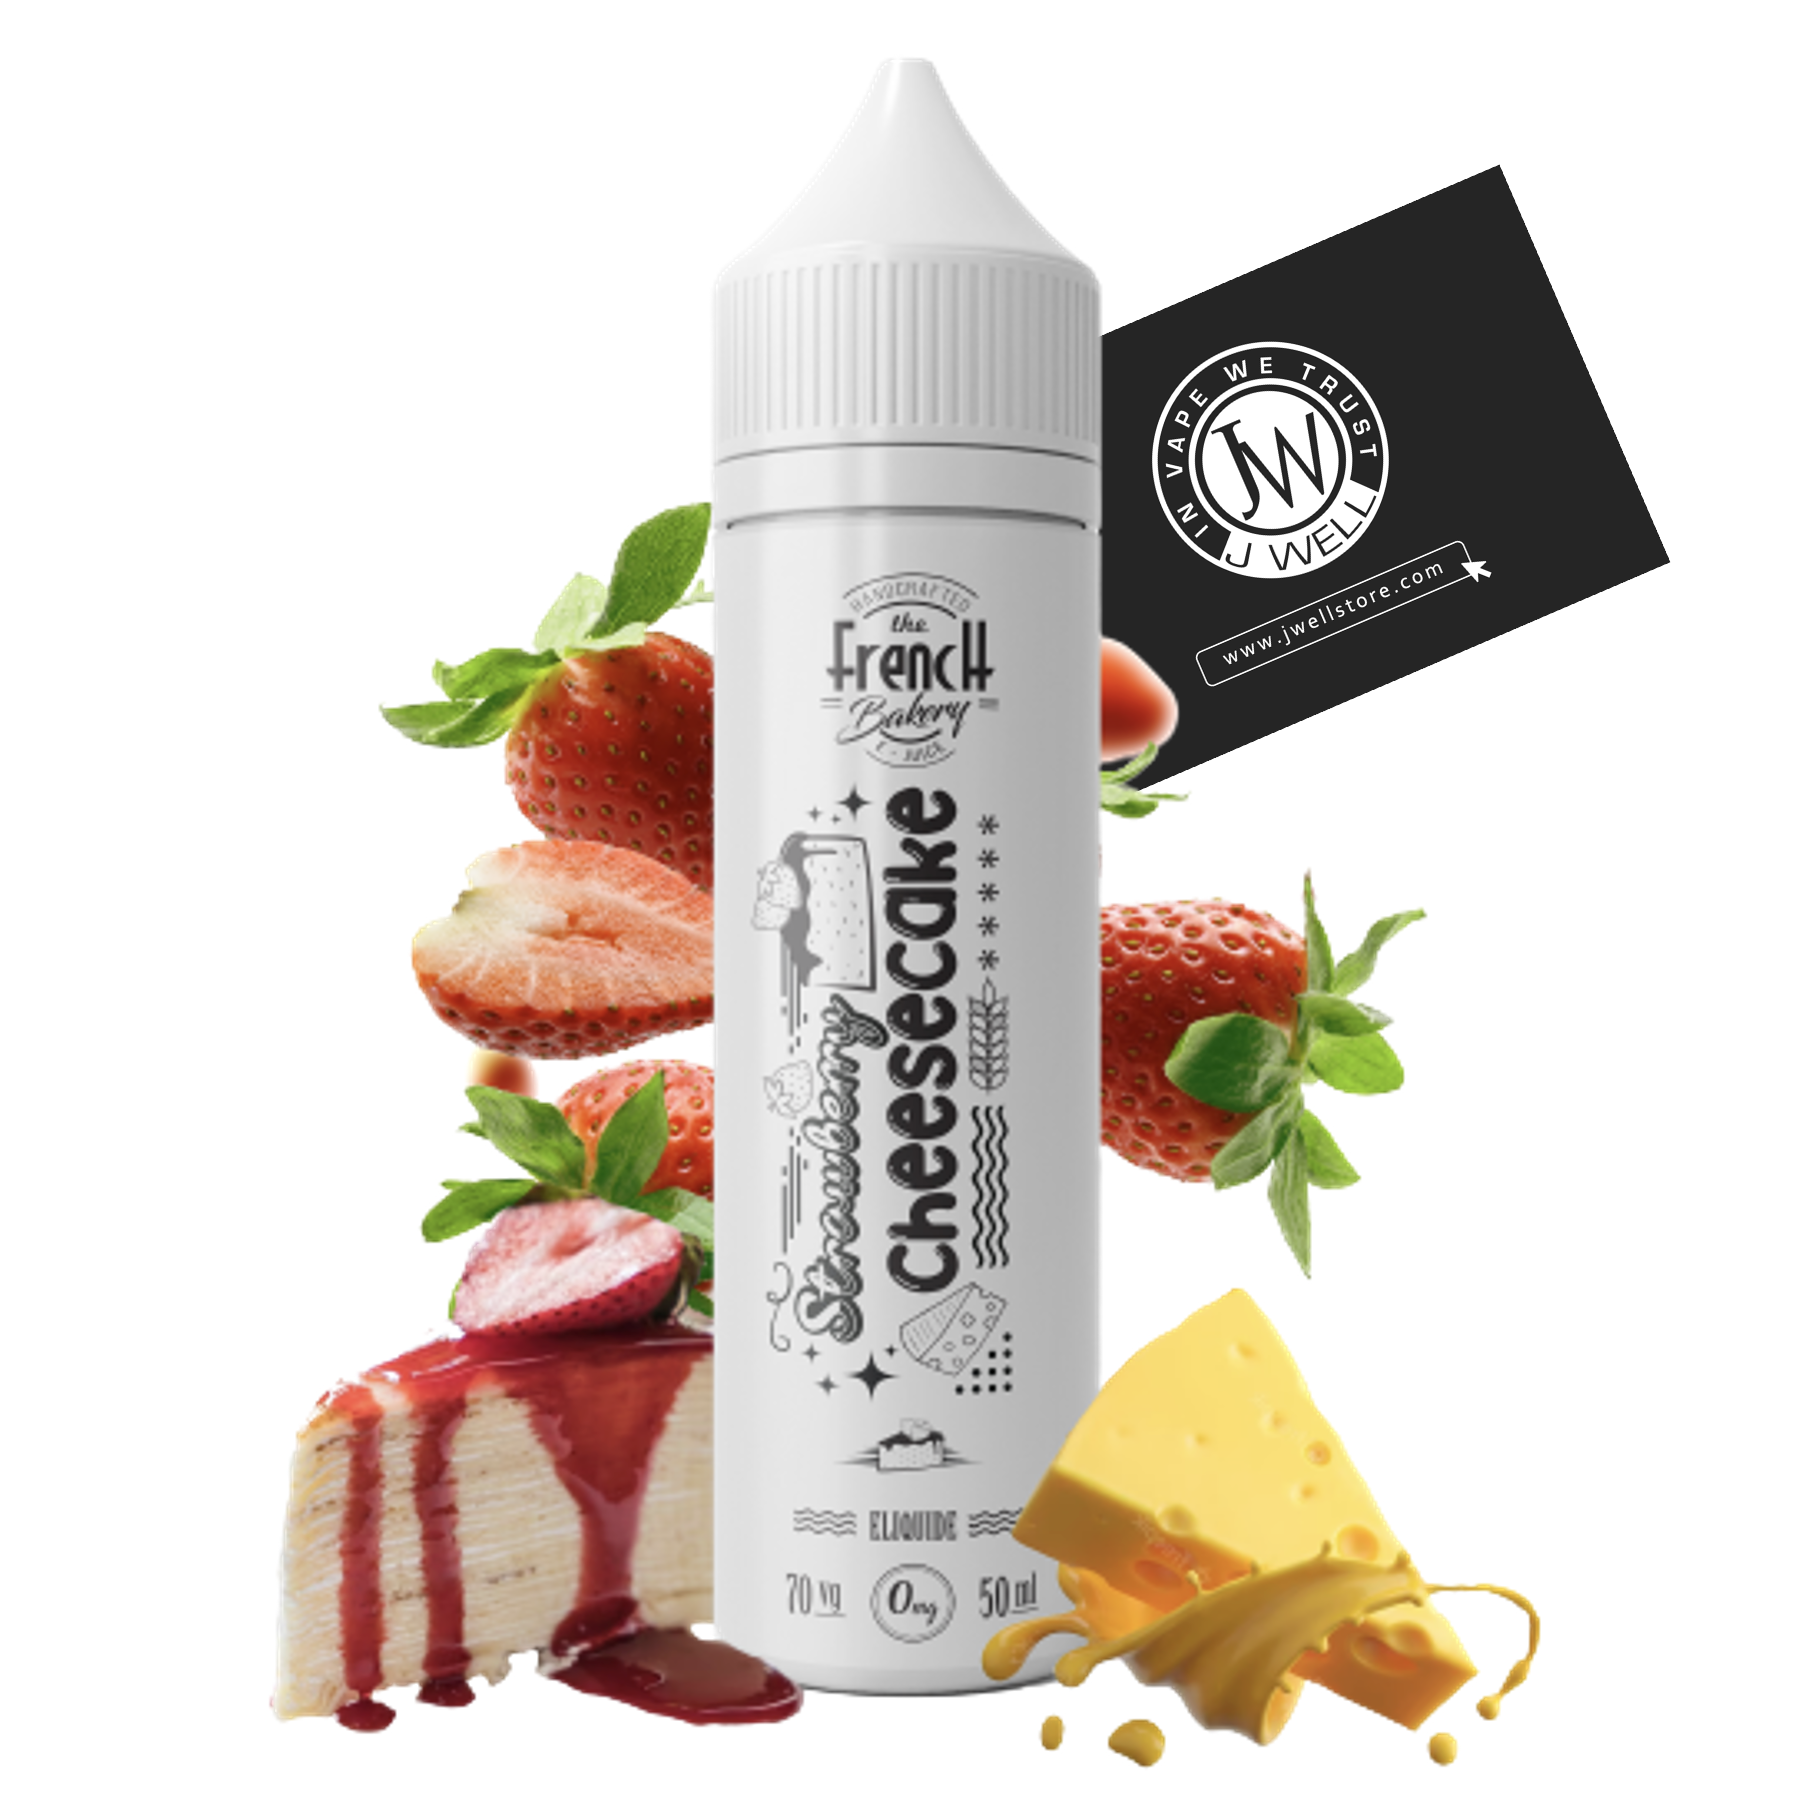 Image E liquide Strawberry Cheesecake 50 ml The French Bakery